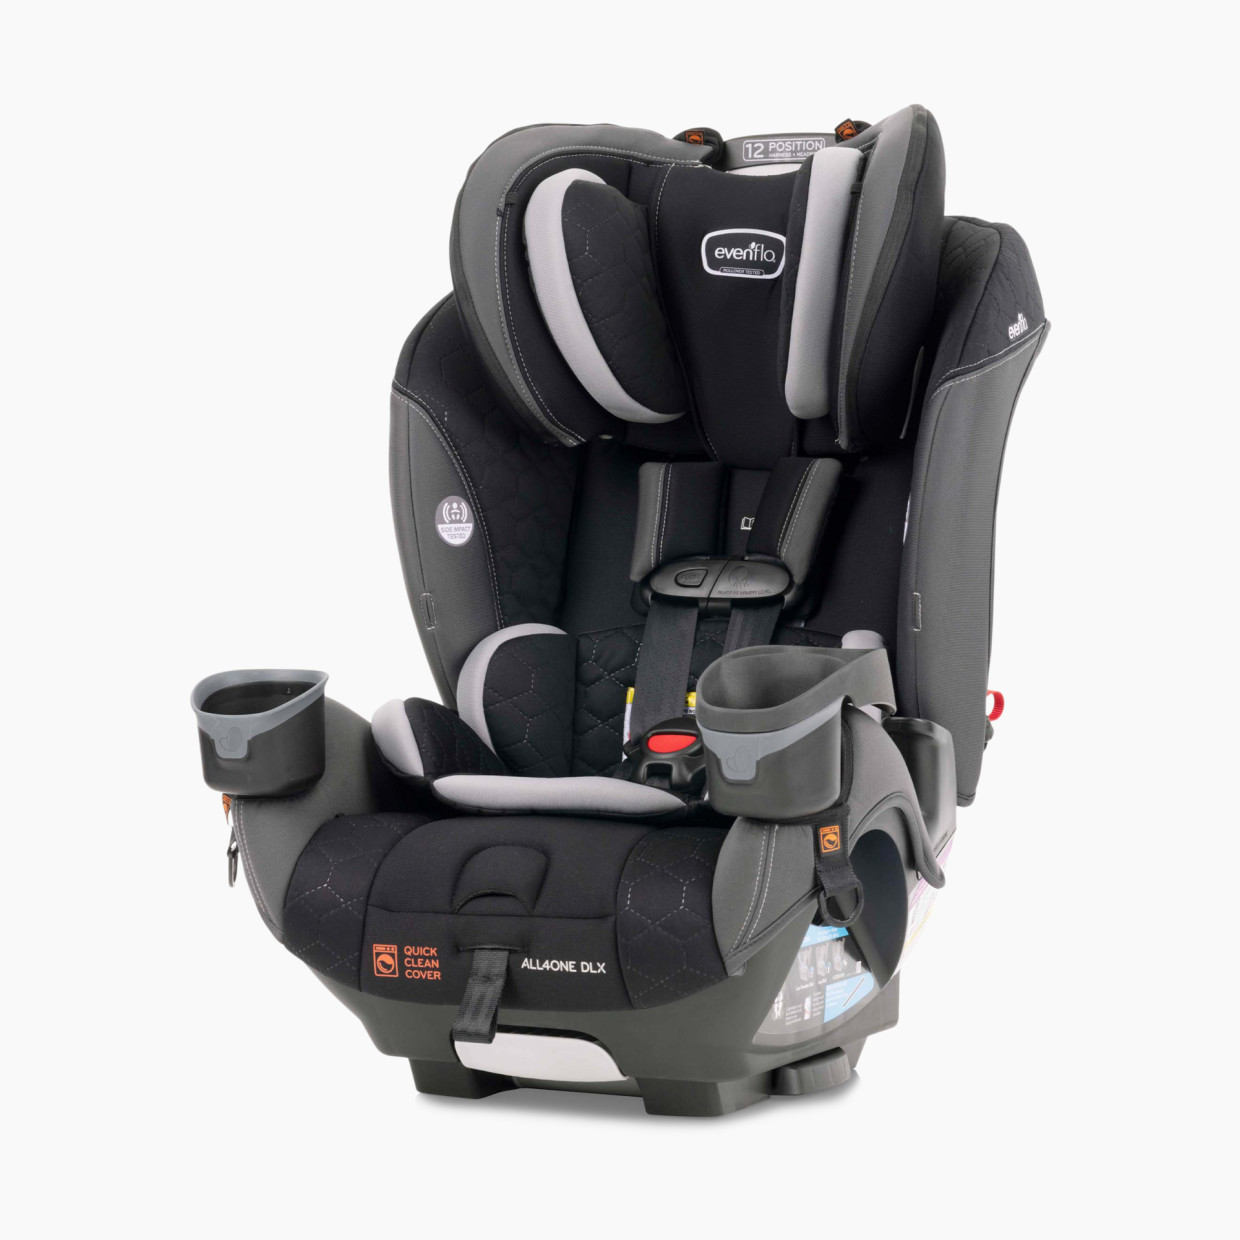 Evenflo EveryFit/All4One 3-in-1 Convertible Car Seat w/Quick Clean Cover - Kingsley Black.